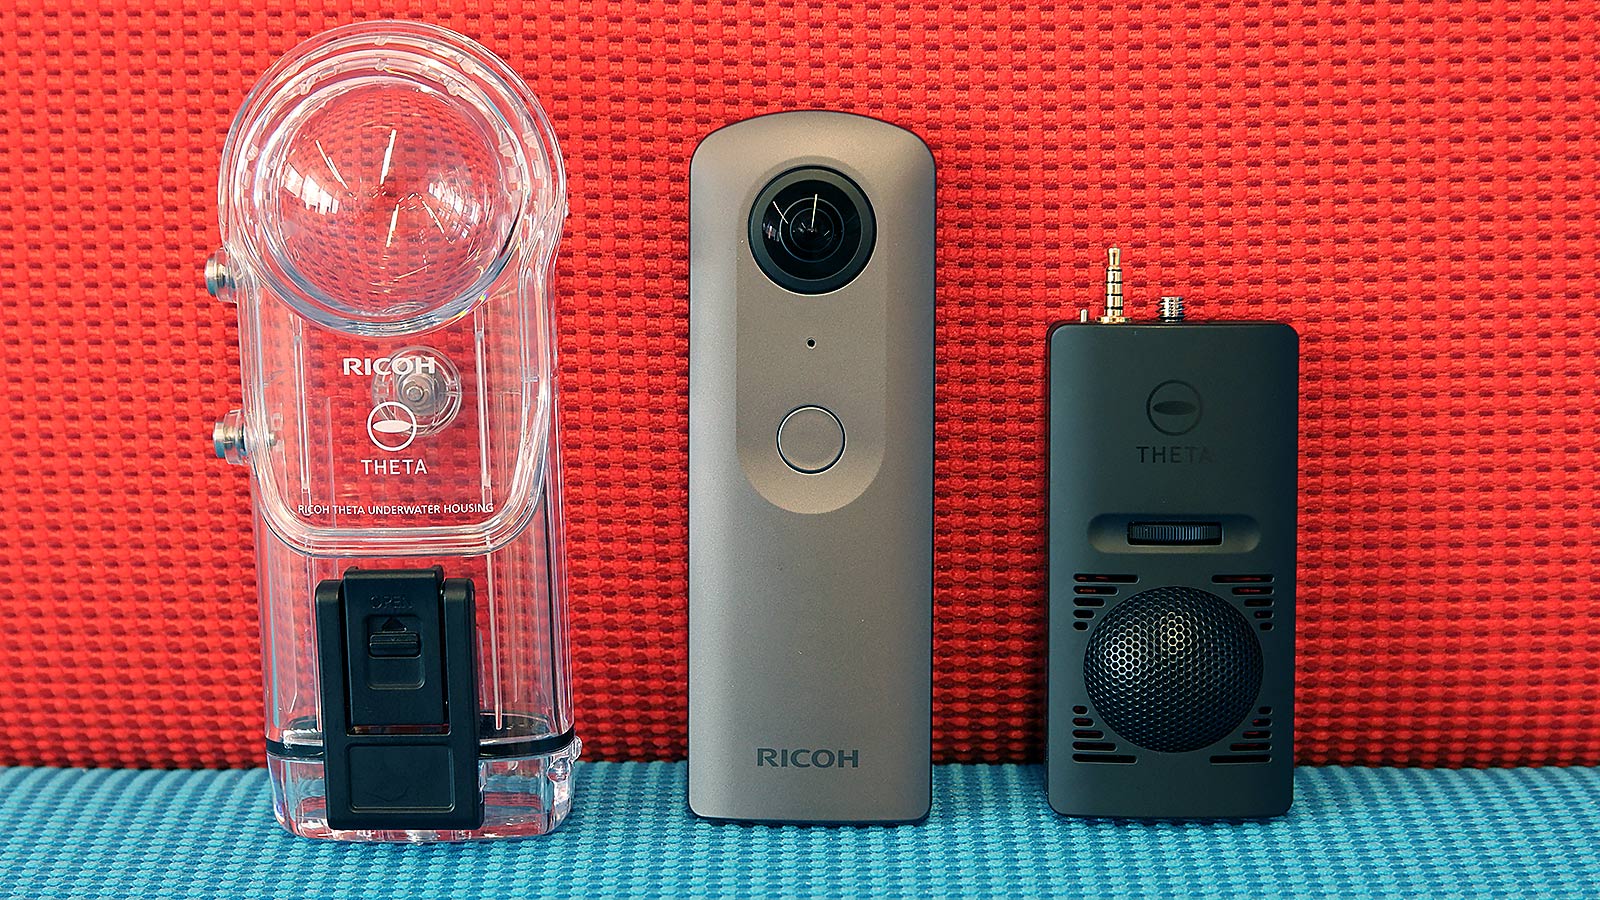 Ricoh’s Theta V Is Sharper And More Powerful, But Let’s Talk About 360 Video…